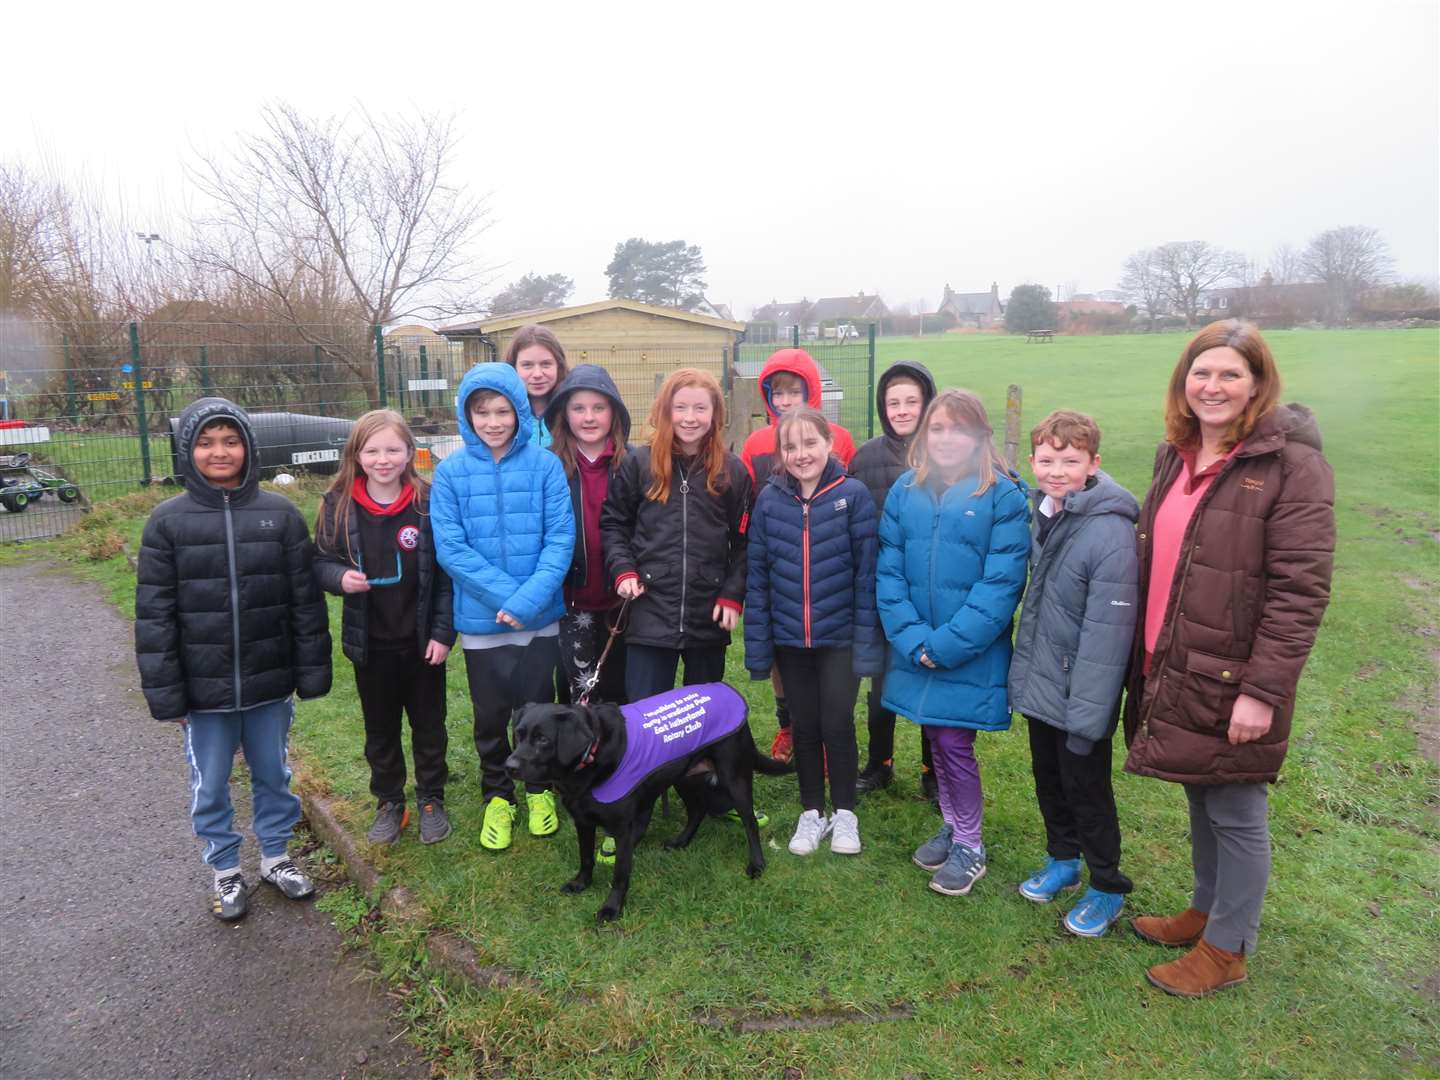 Members of Brora Primary School Rotakids braved the rain to go out for a walk, accompanied by head teacher Dawn McKenzie.